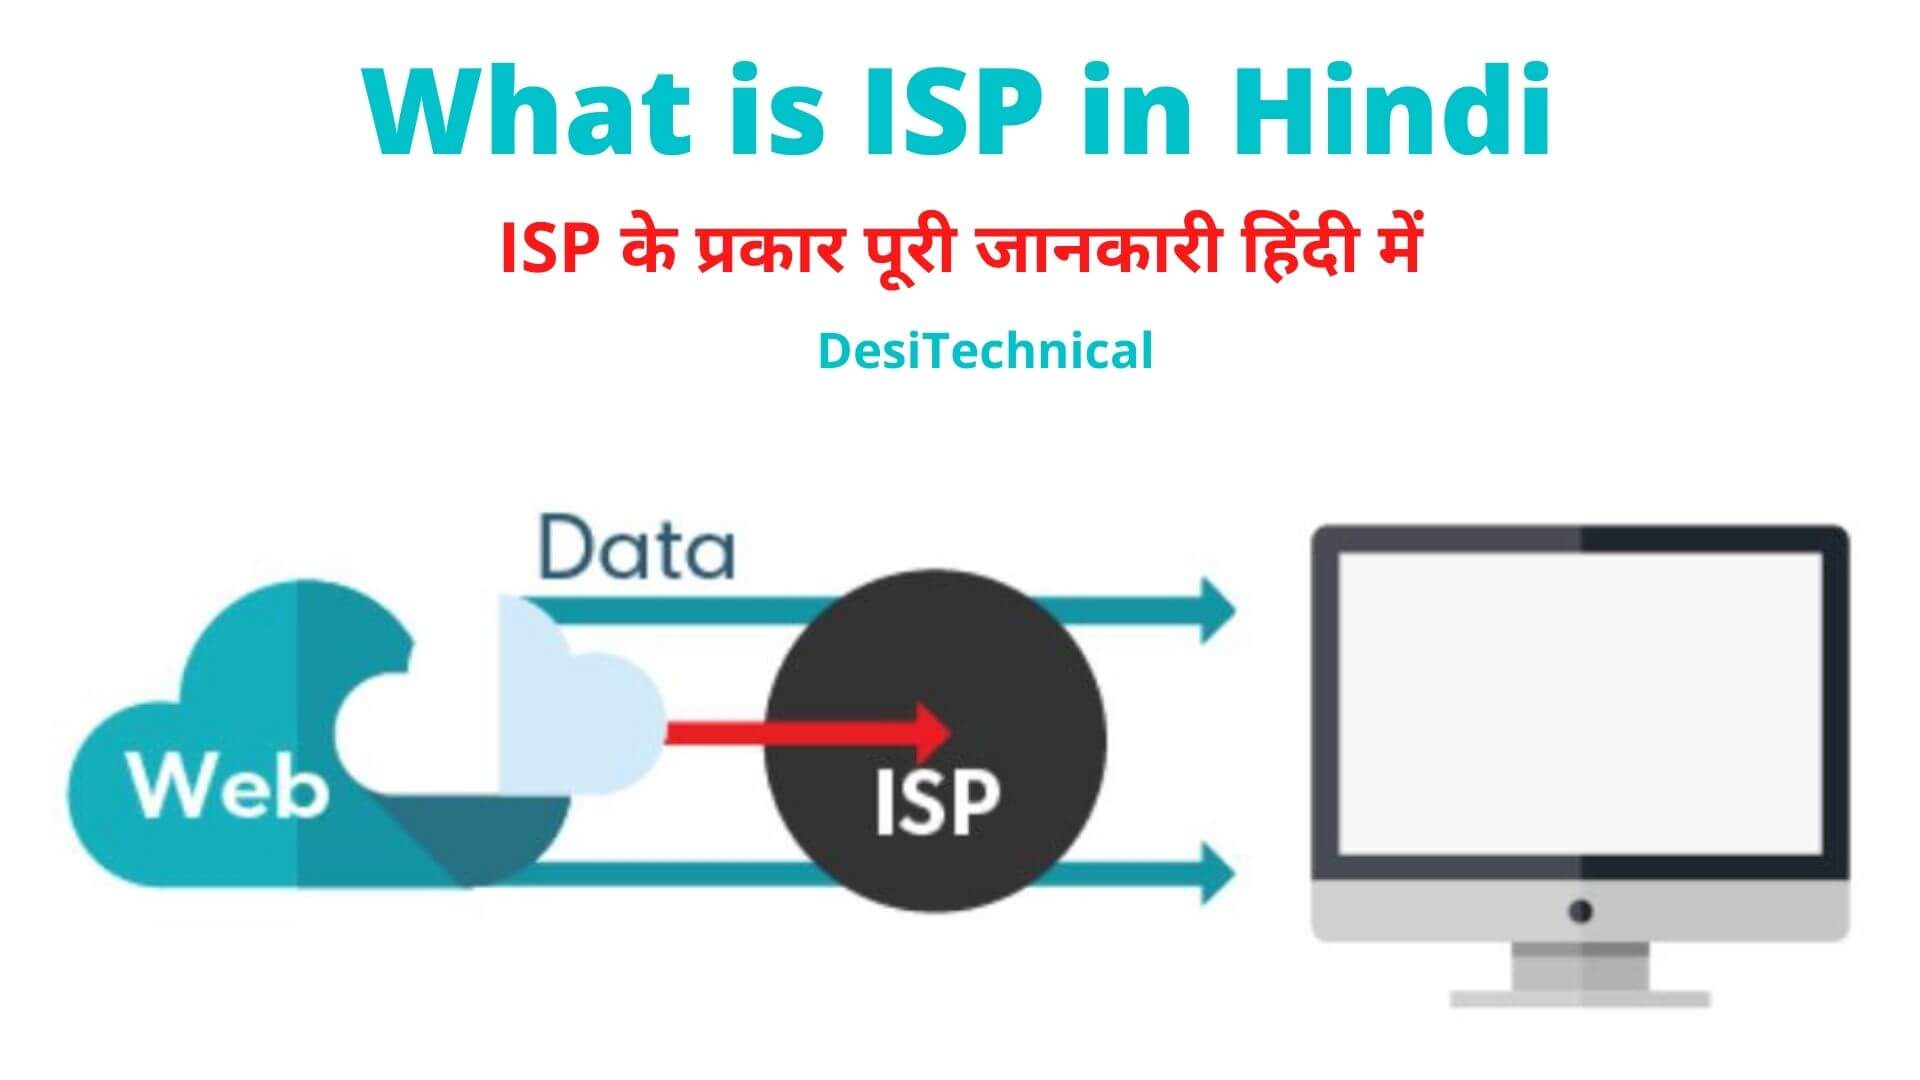 What is ISP in Hindi